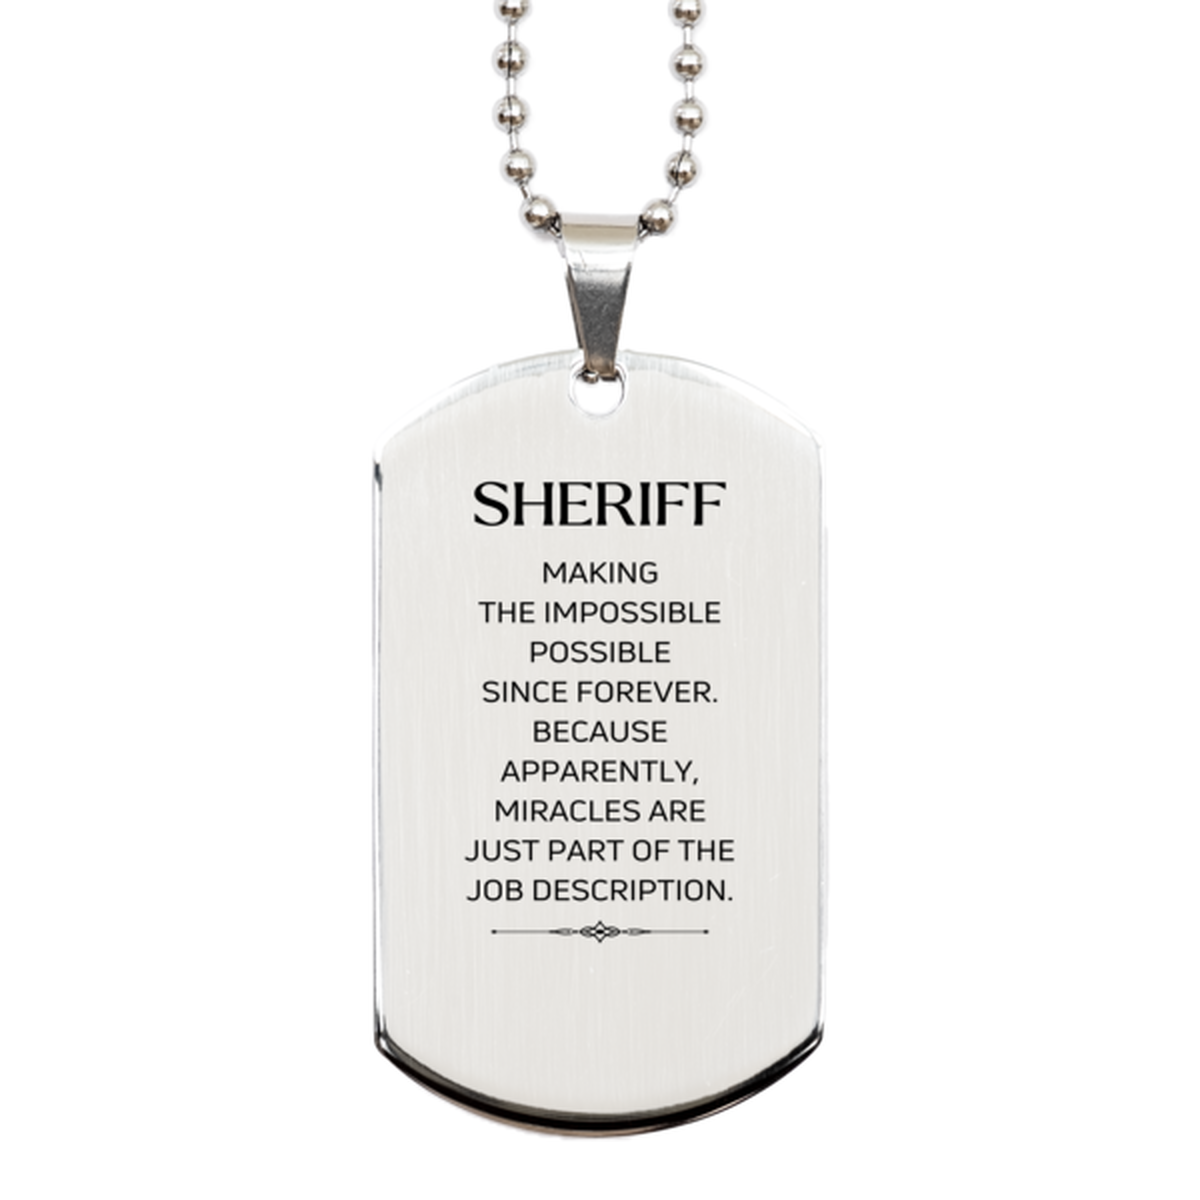 Funny Sheriff Gifts, Miracles are just part of the job description, Inspirational Birthday Silver Dog Tag For Sheriff, Men, Women, Coworkers, Friends, Boss